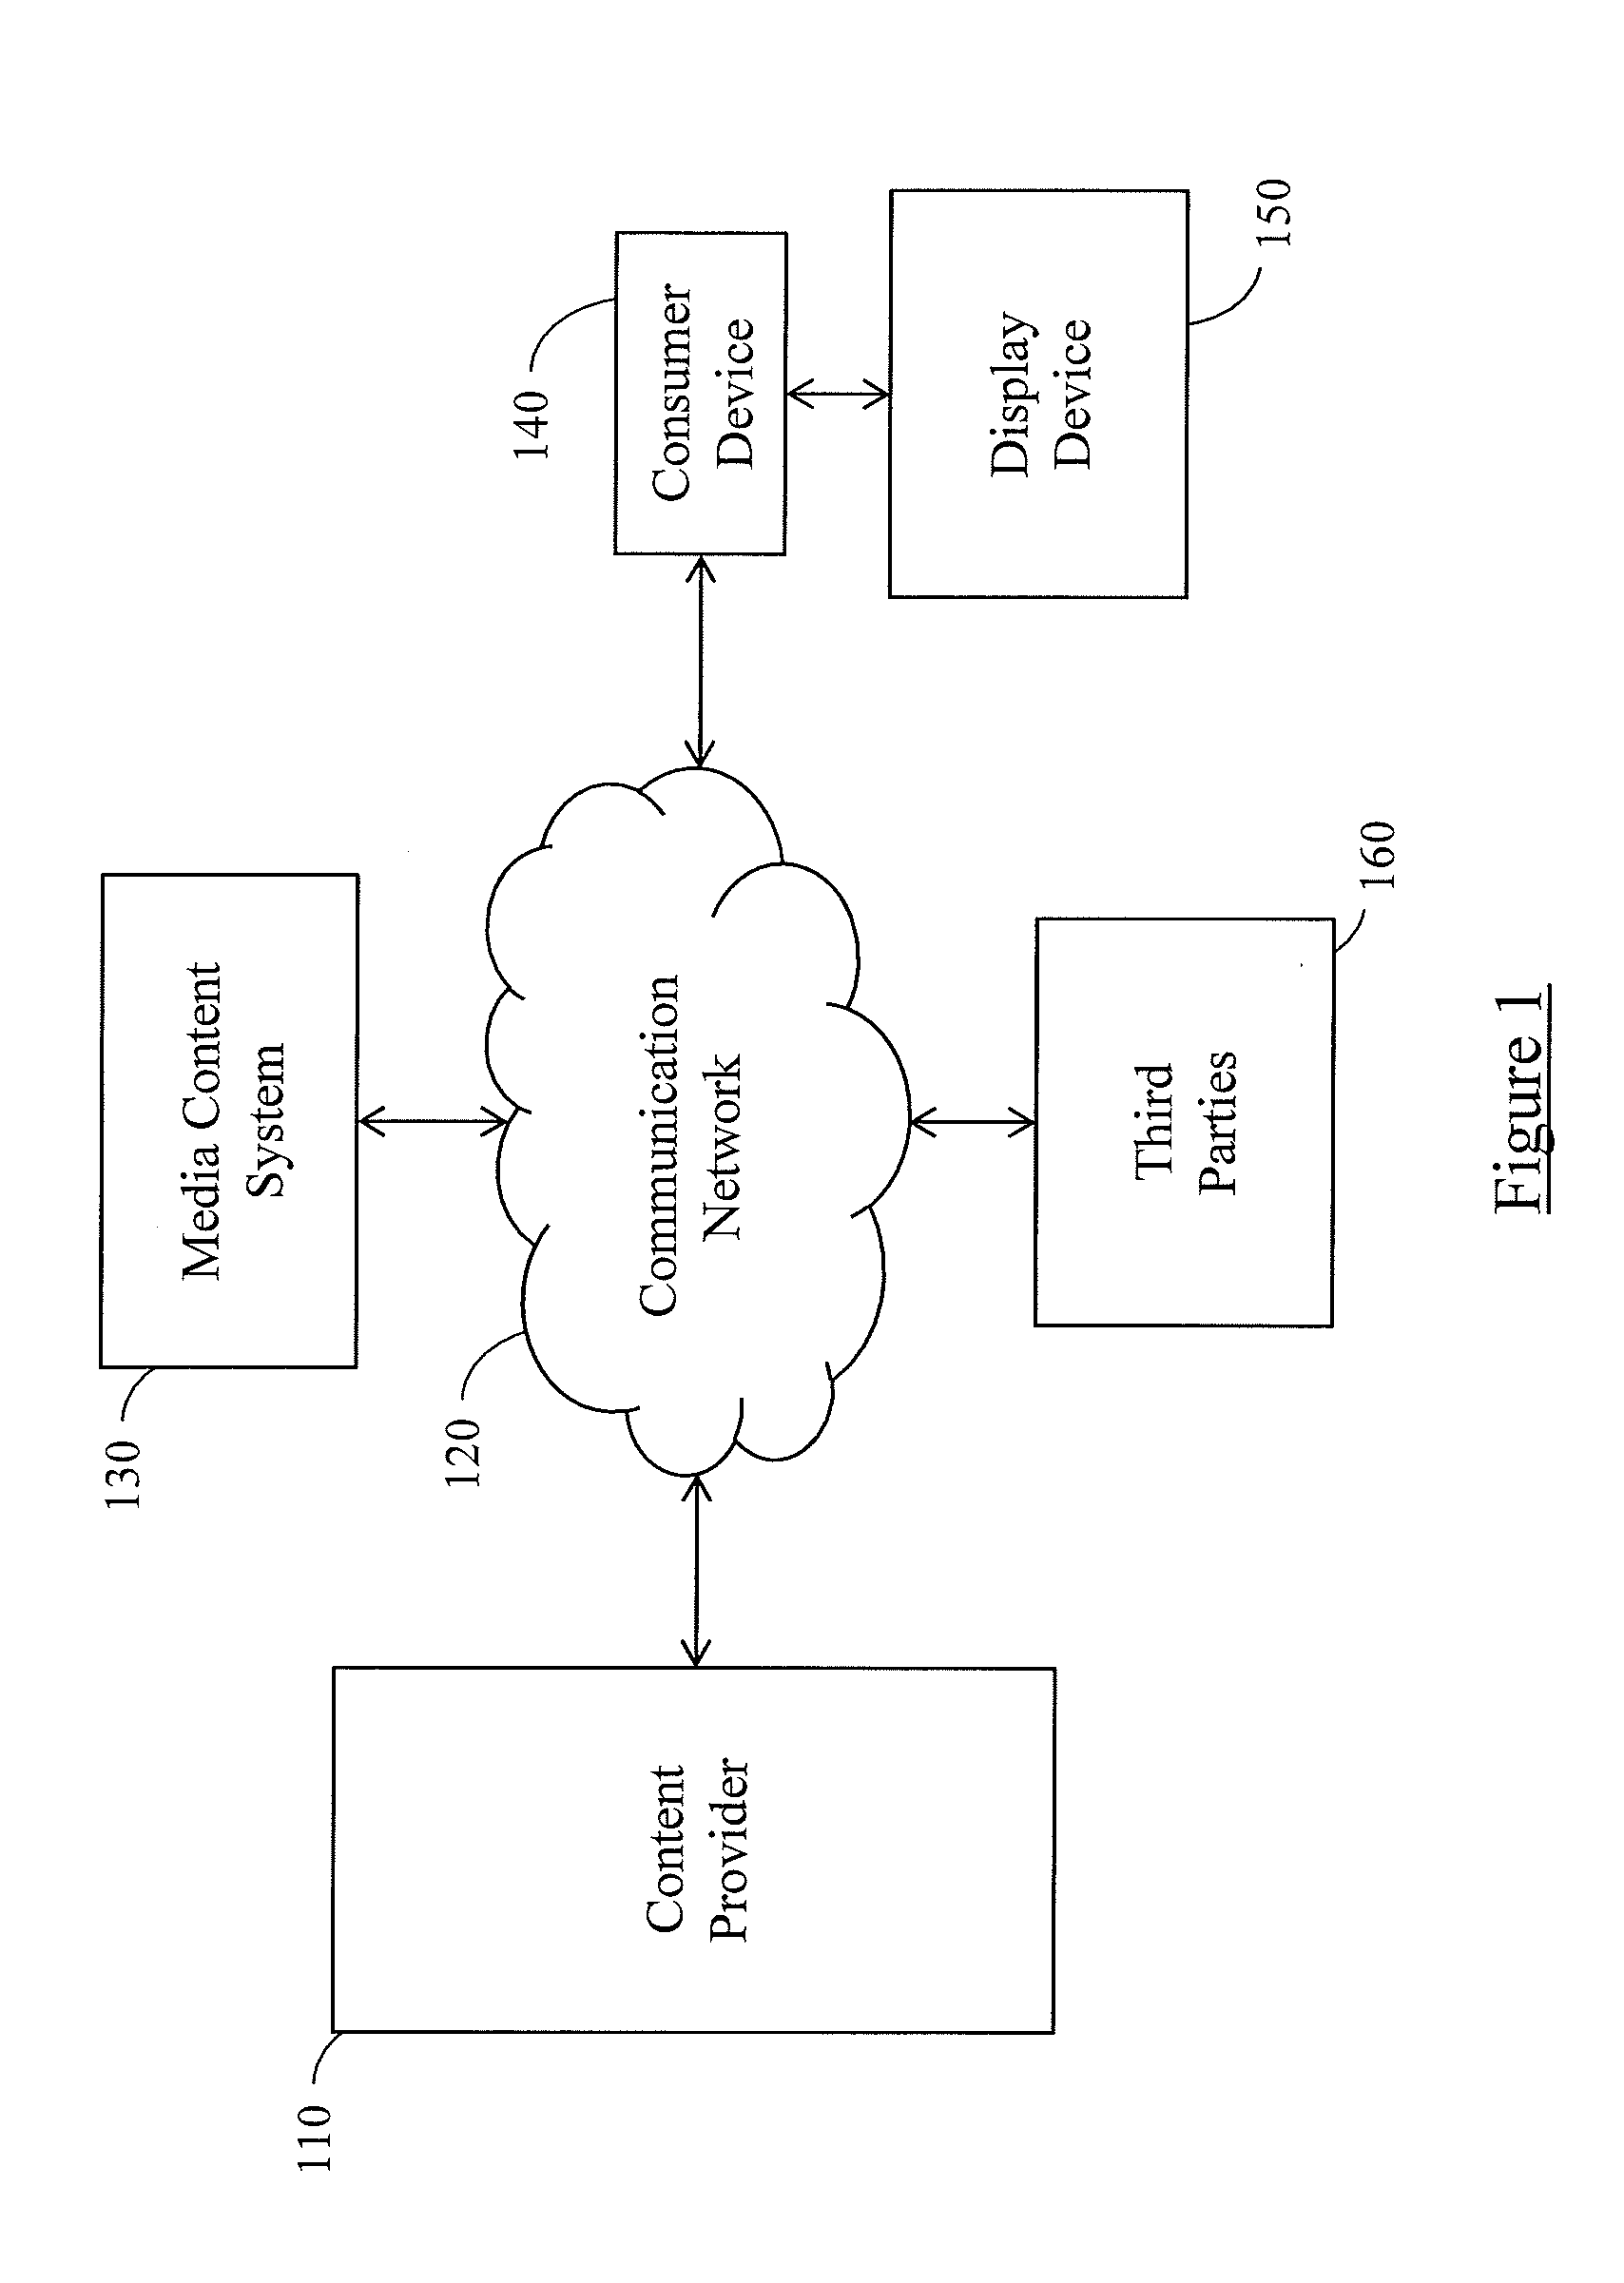 Method and Apparatus for Selection of Advertisements to Fill a Commercial Break of an Unknown Duration